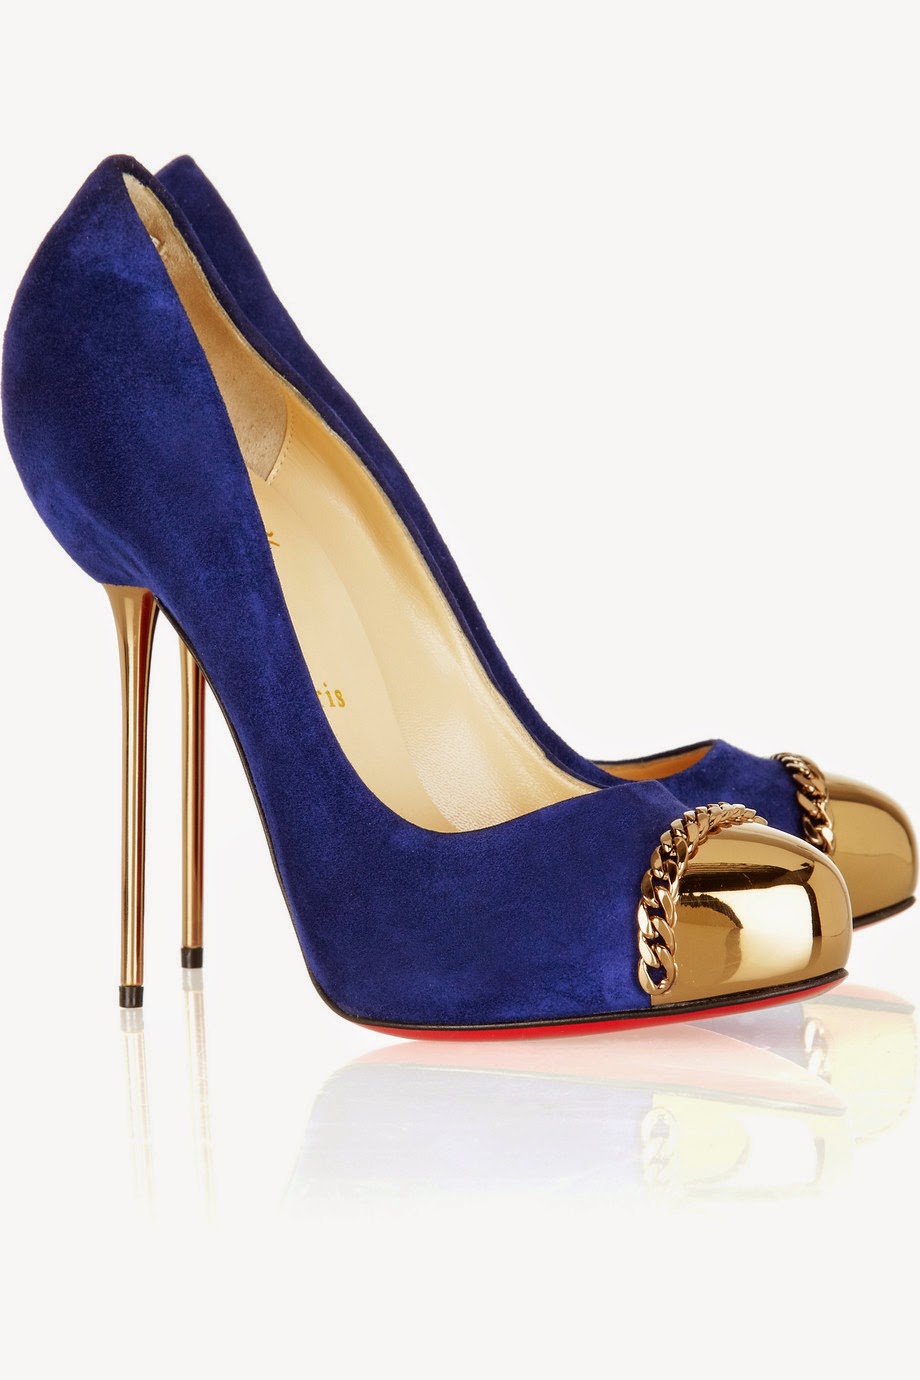 Reed Fashion Christian Louboutin Metallip 120 suede, metal heel and toe with chain link